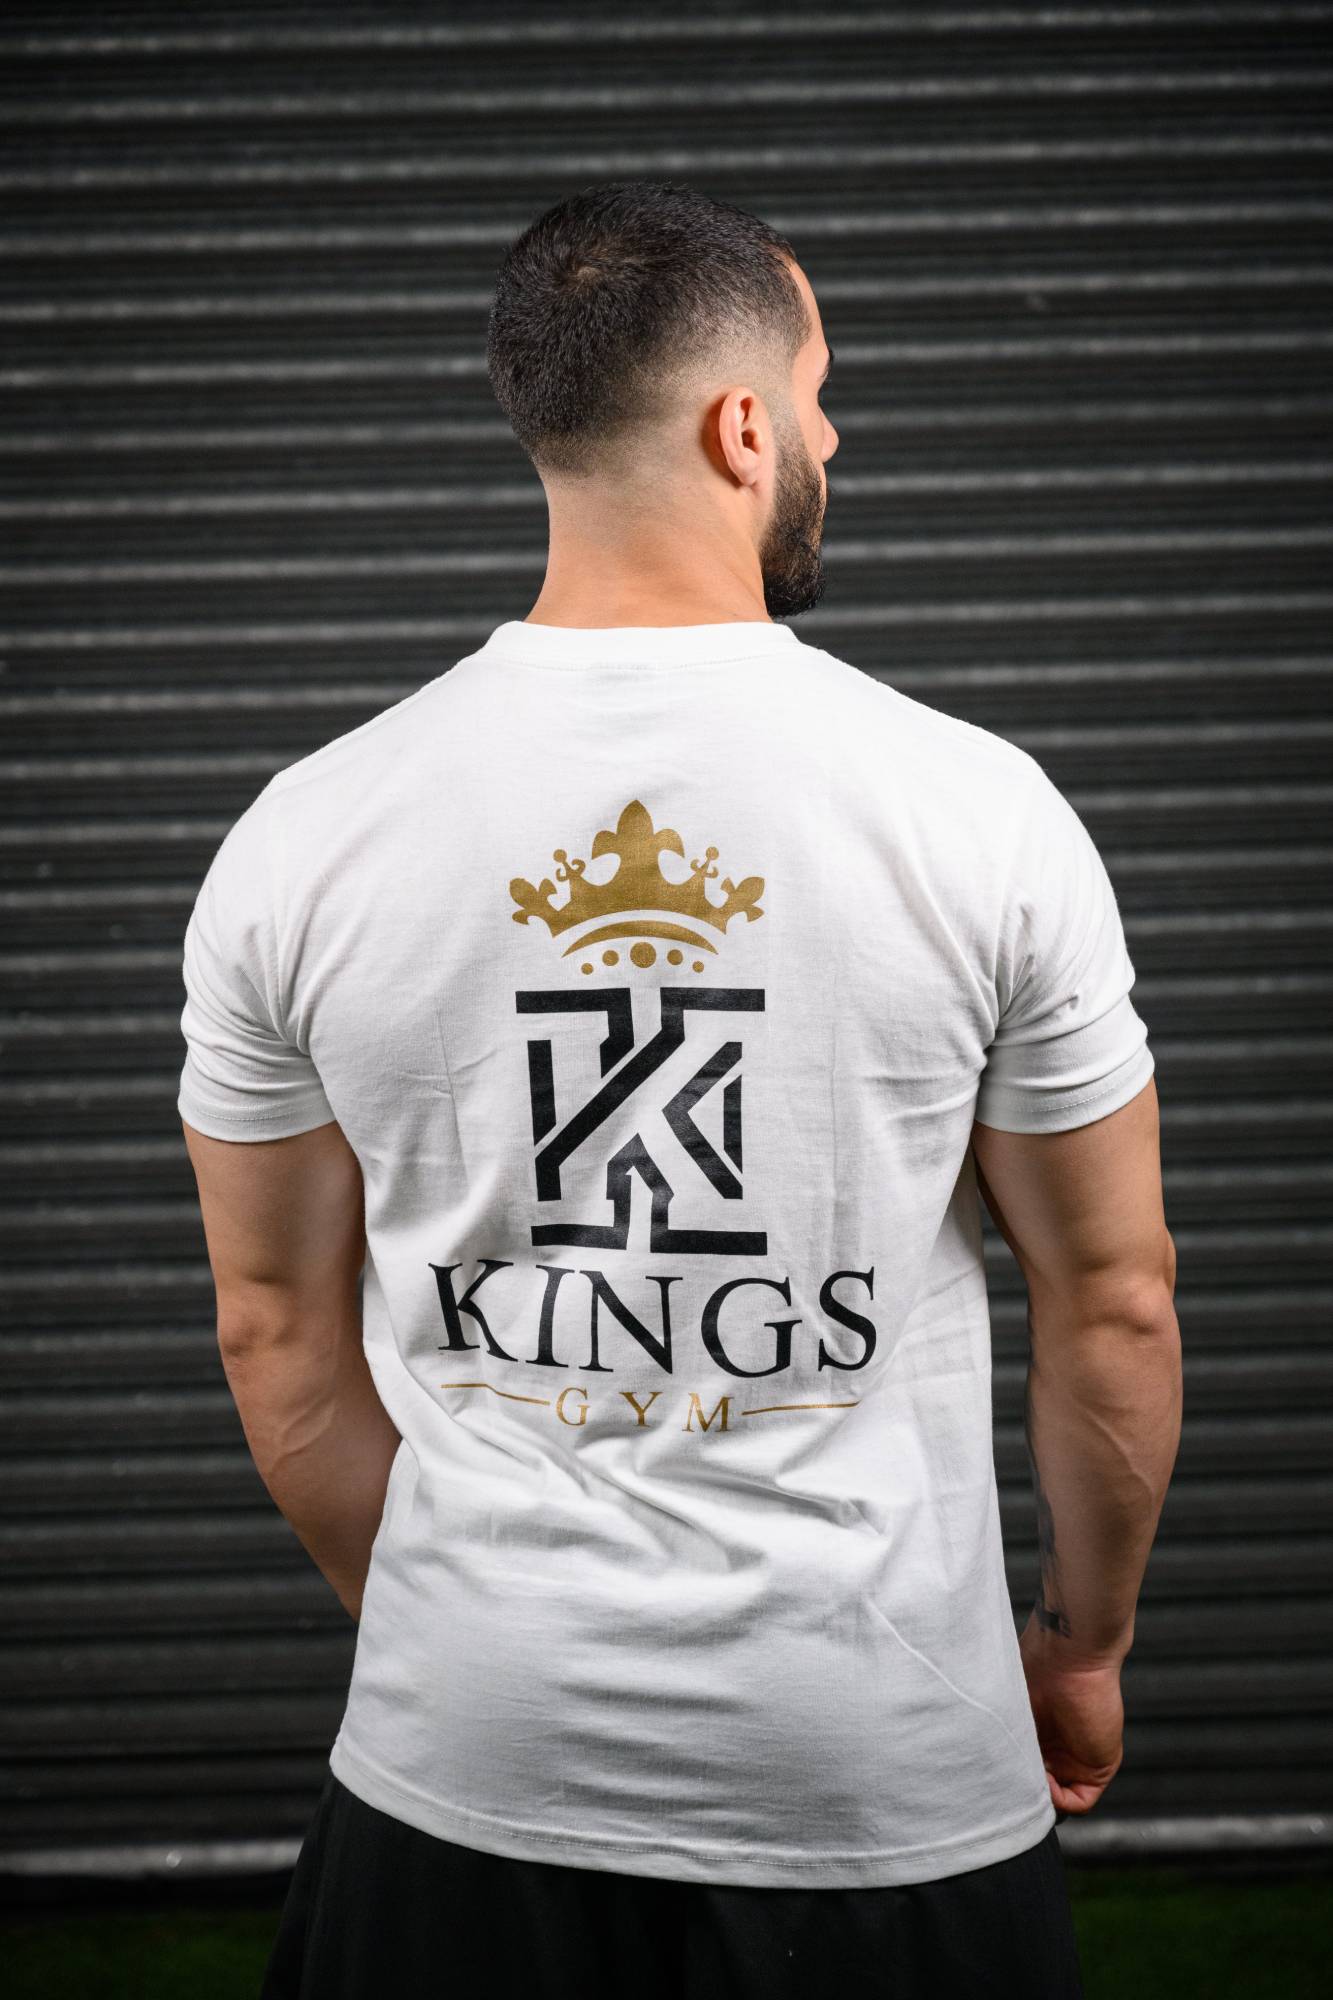 Classic Muscle Fit Gym T-Shirts – kingsgyms